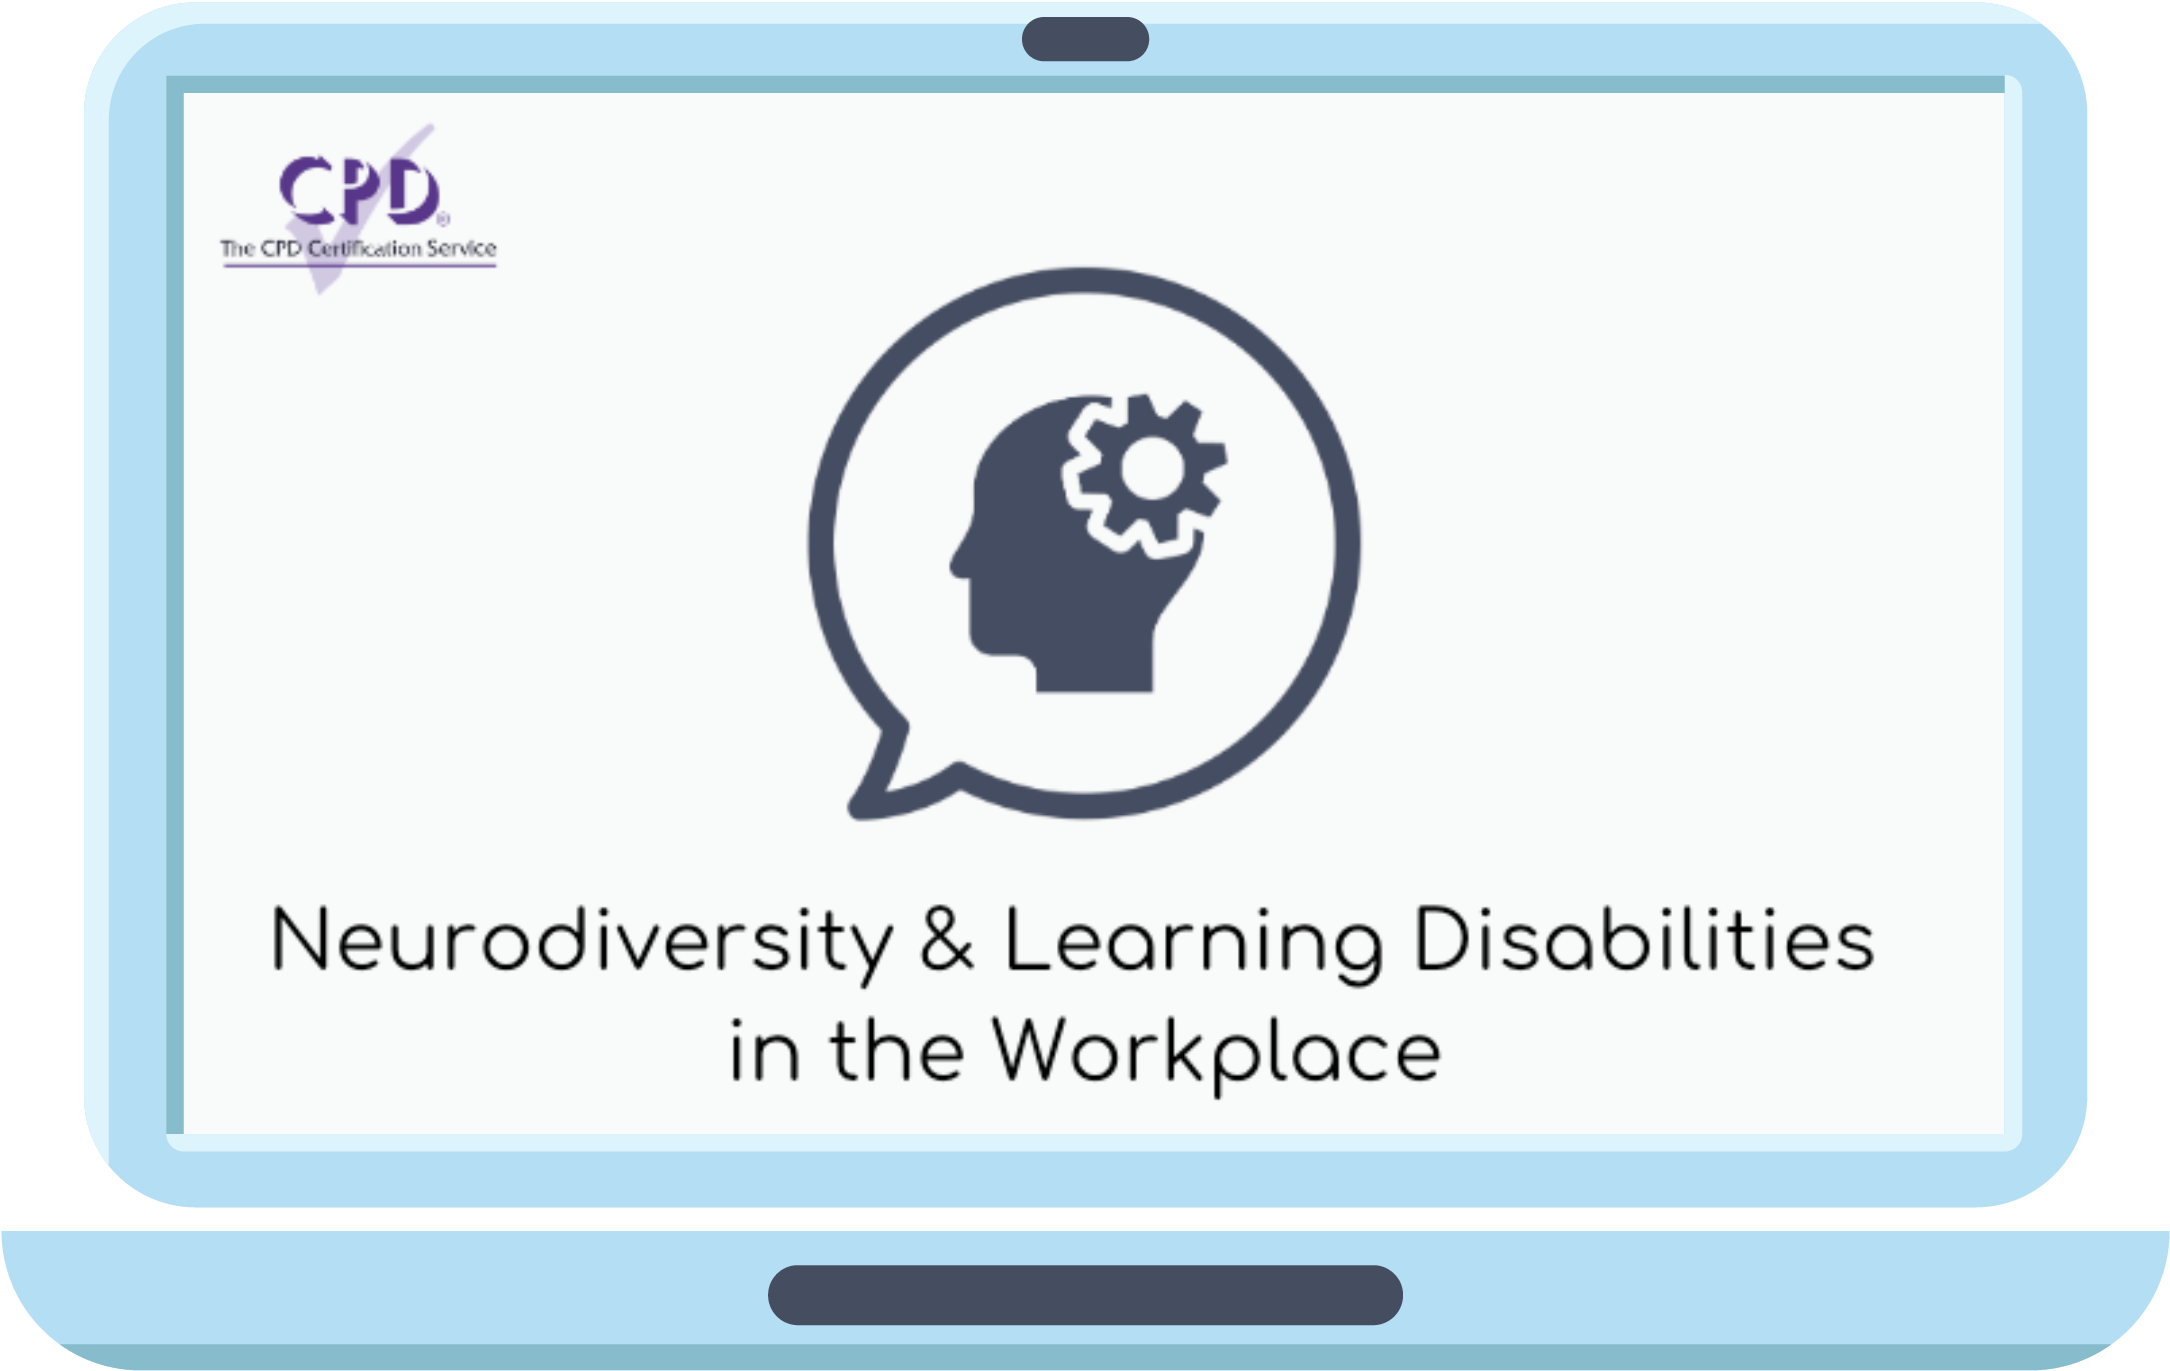 Neurodiversity & Learning Disabilities in the workplace